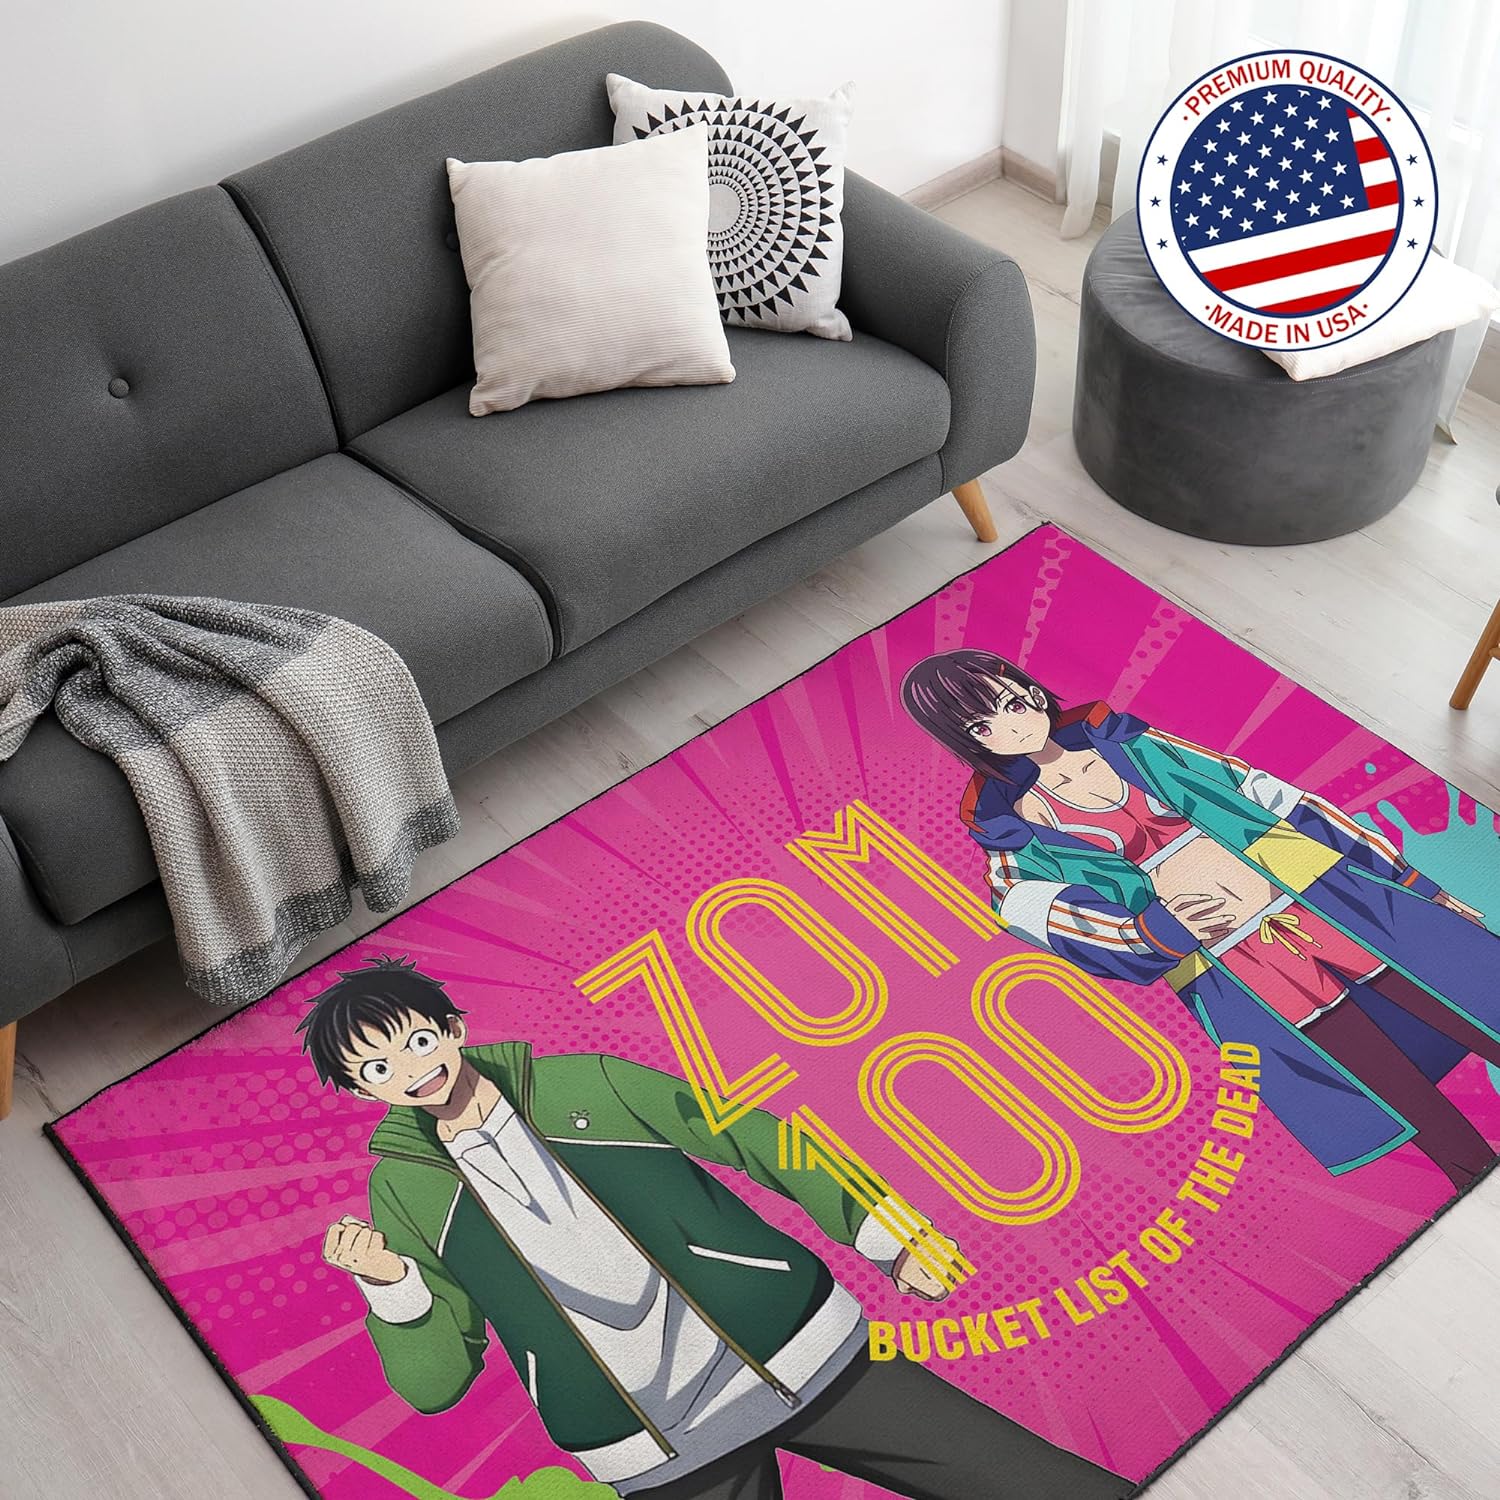 Zoom 100 Gaming Rug - 62x40 inches, Playful Design, Durable Construction